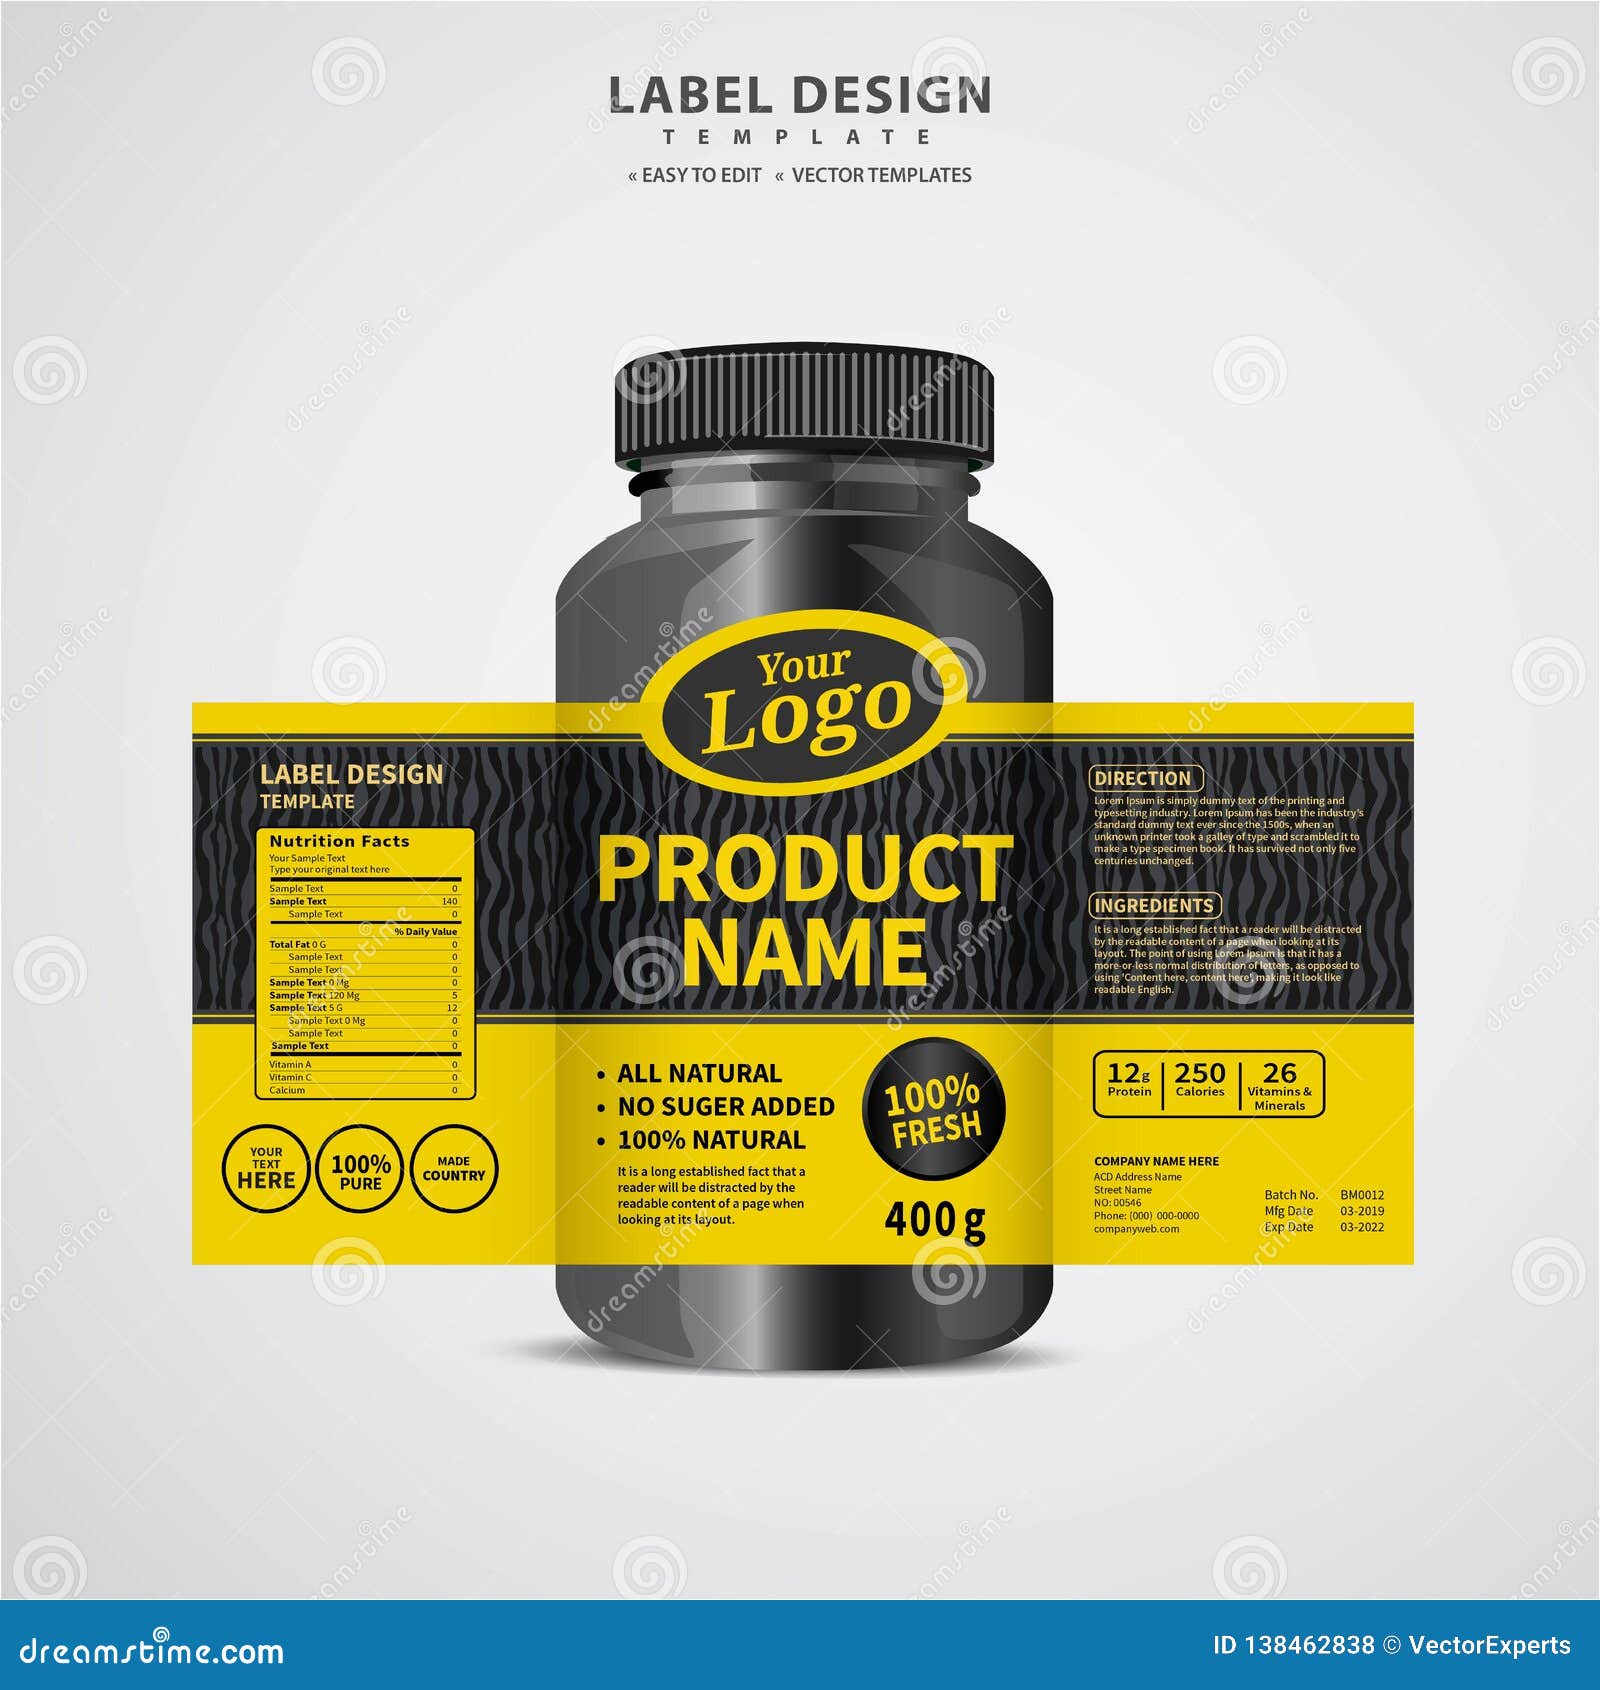 Medicine Bottle Labels Template from thumbs.dreamstime.com